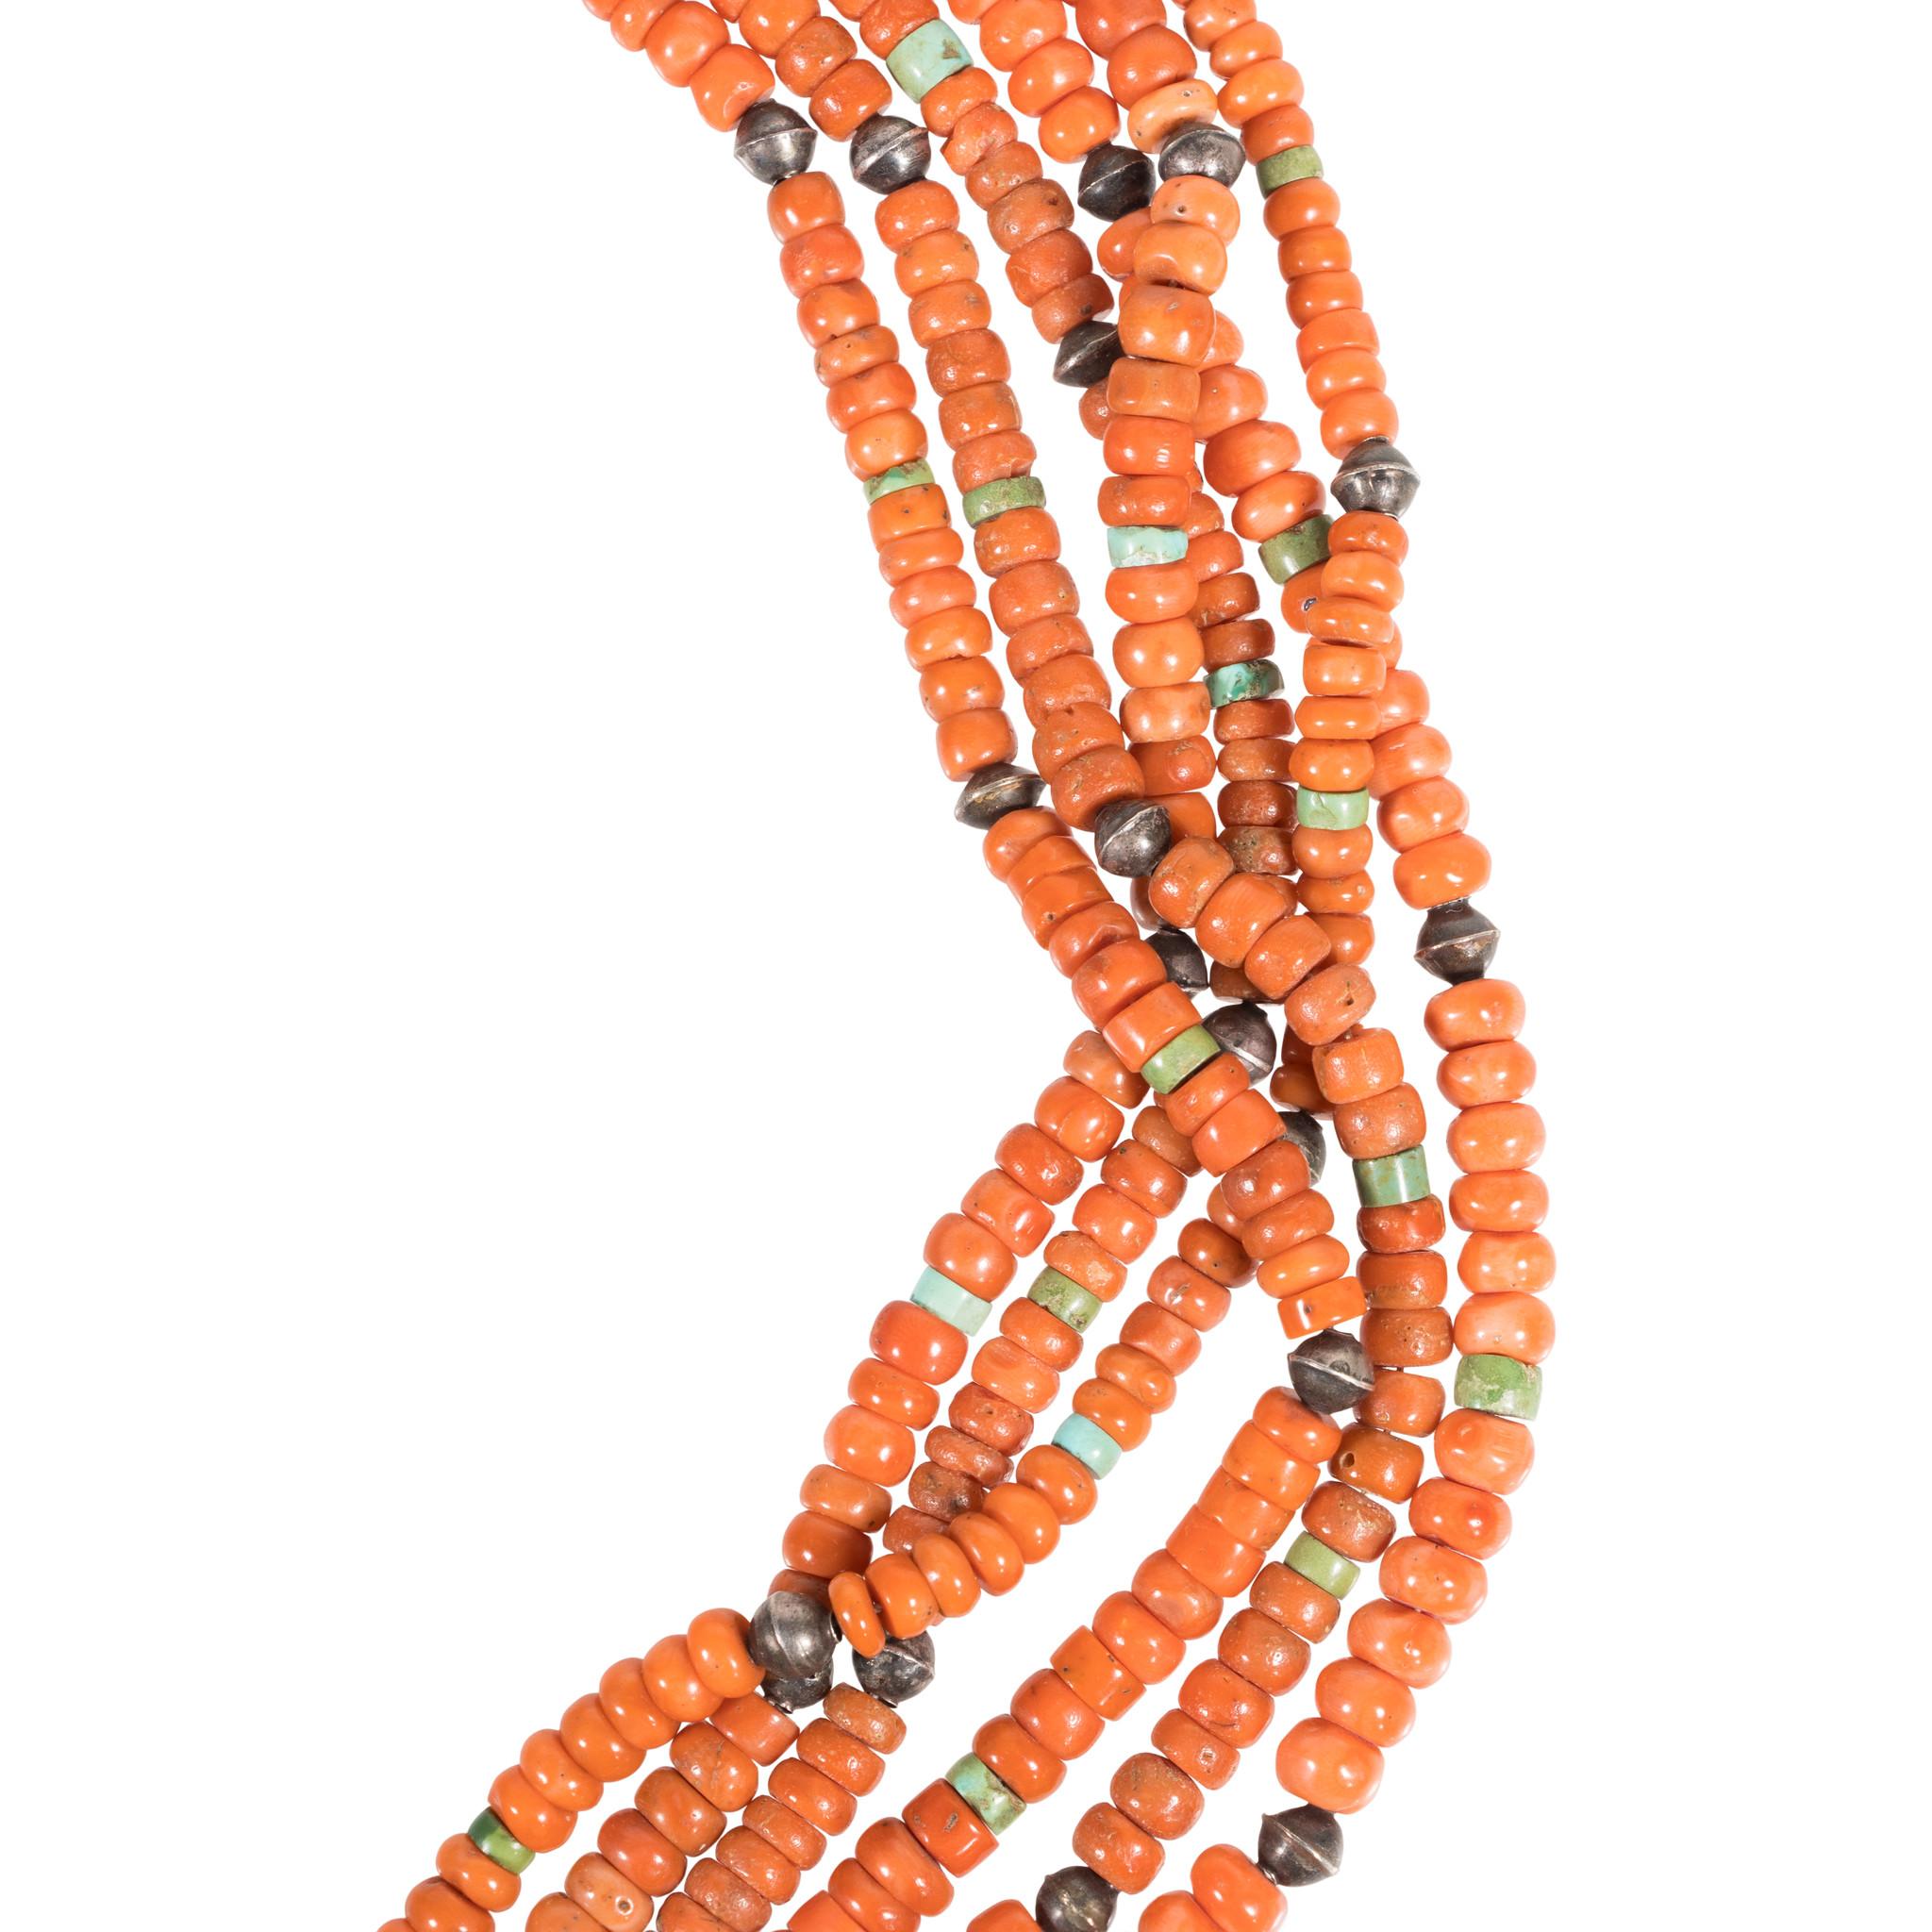 Native American Zuni six strand beaded coral necklace with traditional cord wrapping. Strung with graduated coral beads, accented with turquoise and patinaed silver beads. Coral is a bright burnt orange color. Beads are small with some size